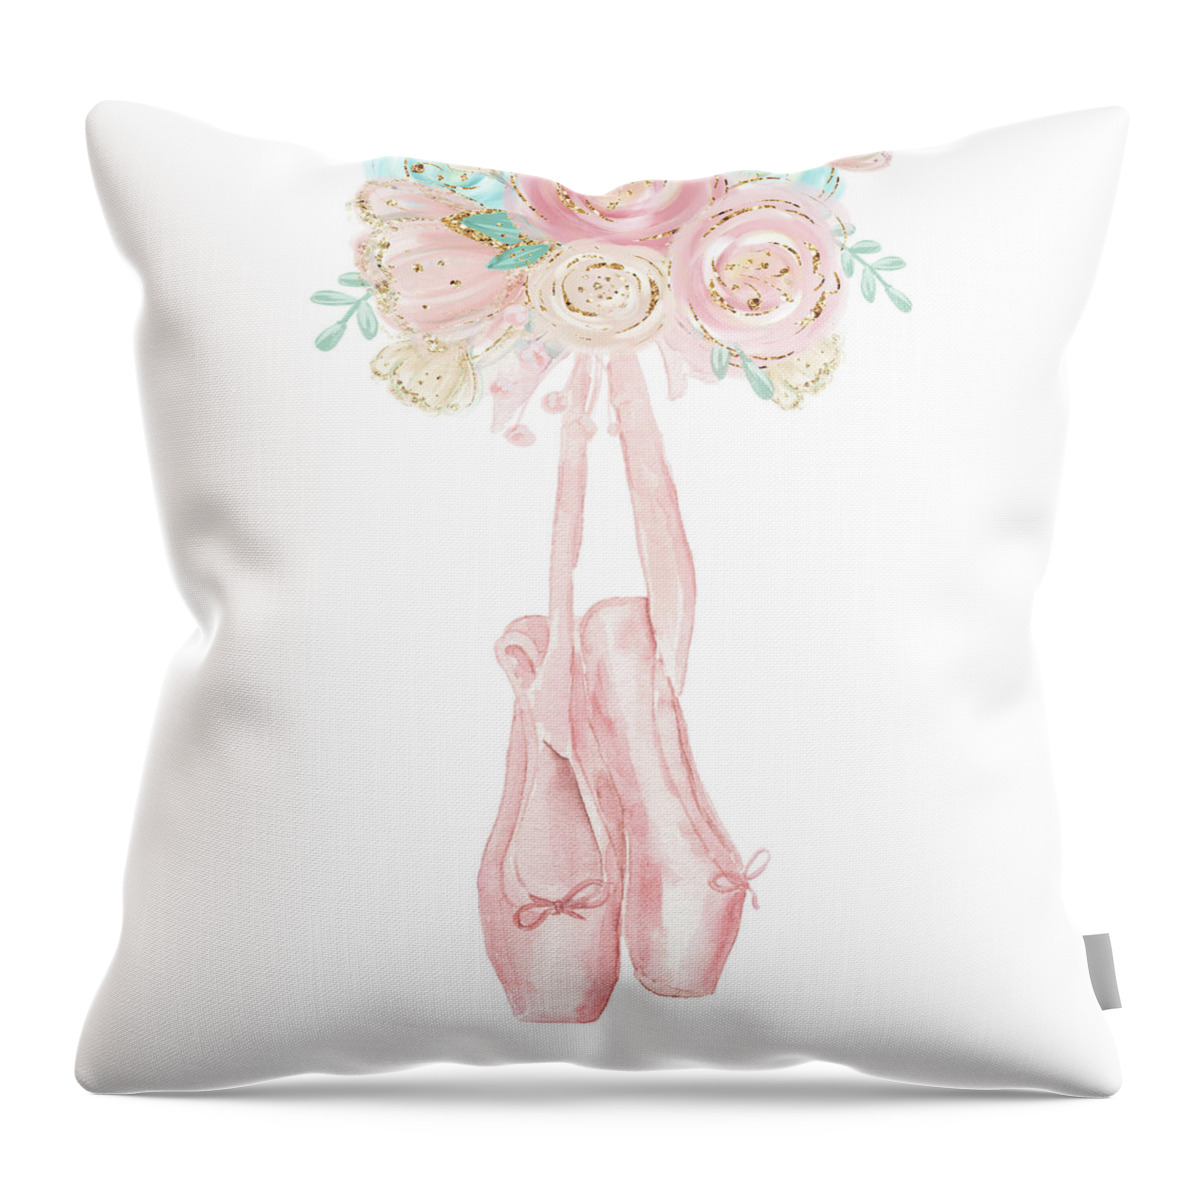 Ballerina Throw Pillow featuring the digital art Ballerina Ballet Shoes Floral Feather Watercolor Gold Pink Mint by Pink Forest Cafe